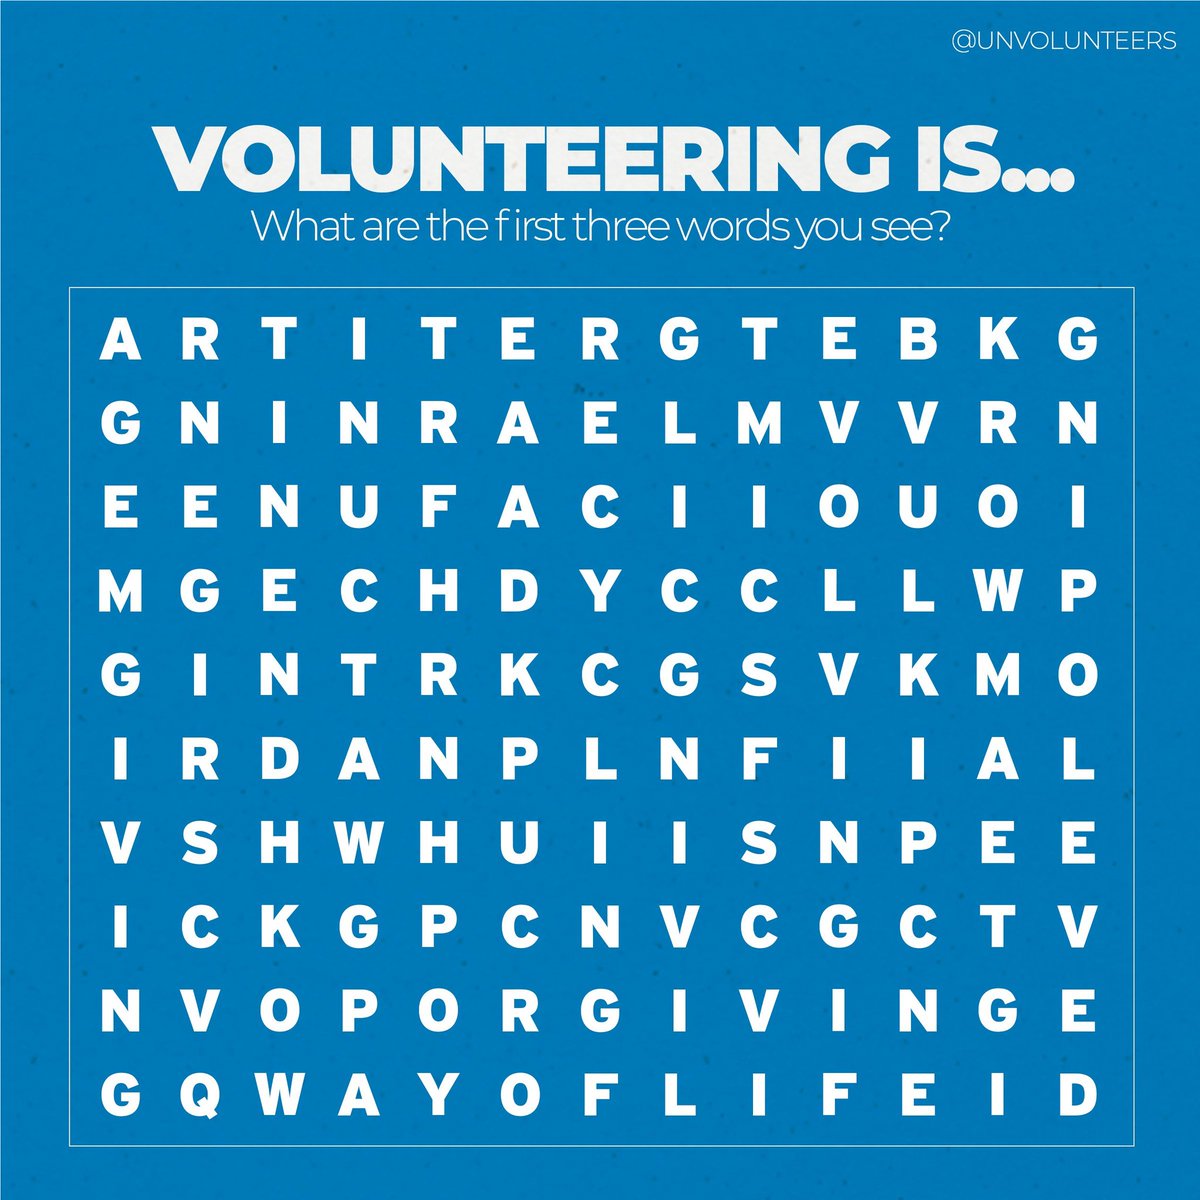 Weekend trivia👇🏾 Volunteering is...? Discover at least 3 missing words, and comment below!